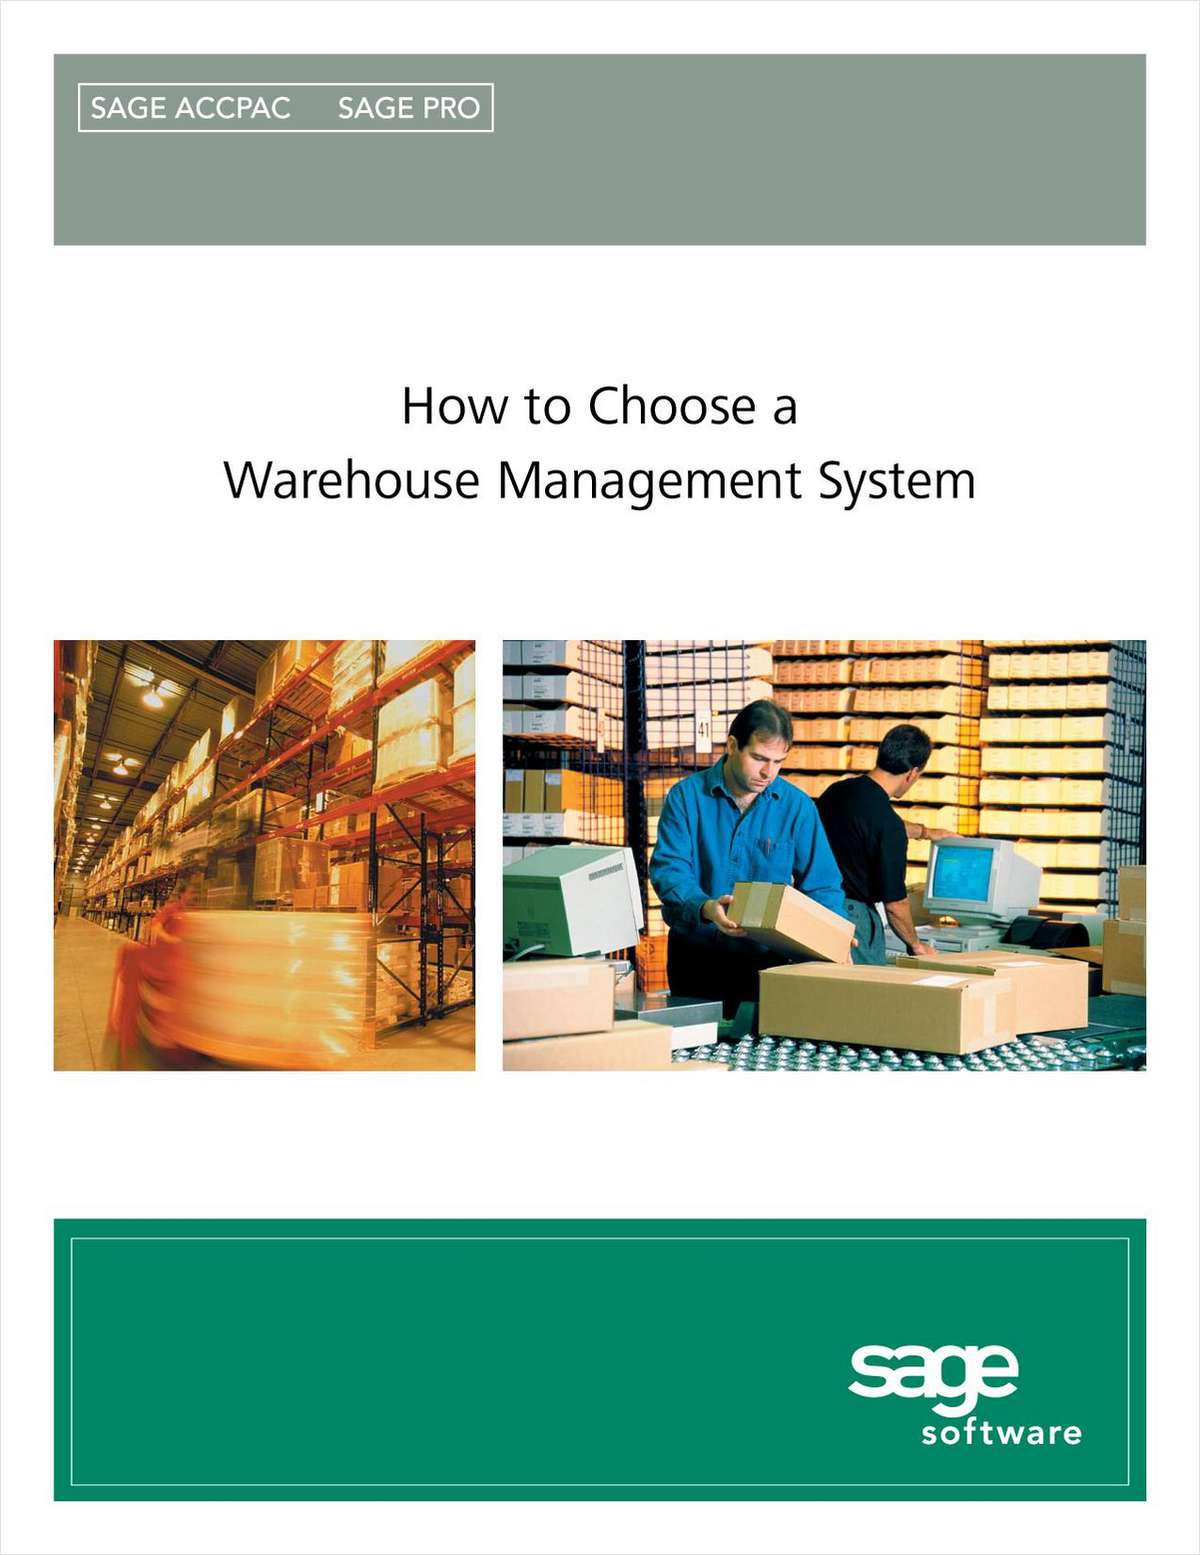 How to Select a Warehouse Management Solution